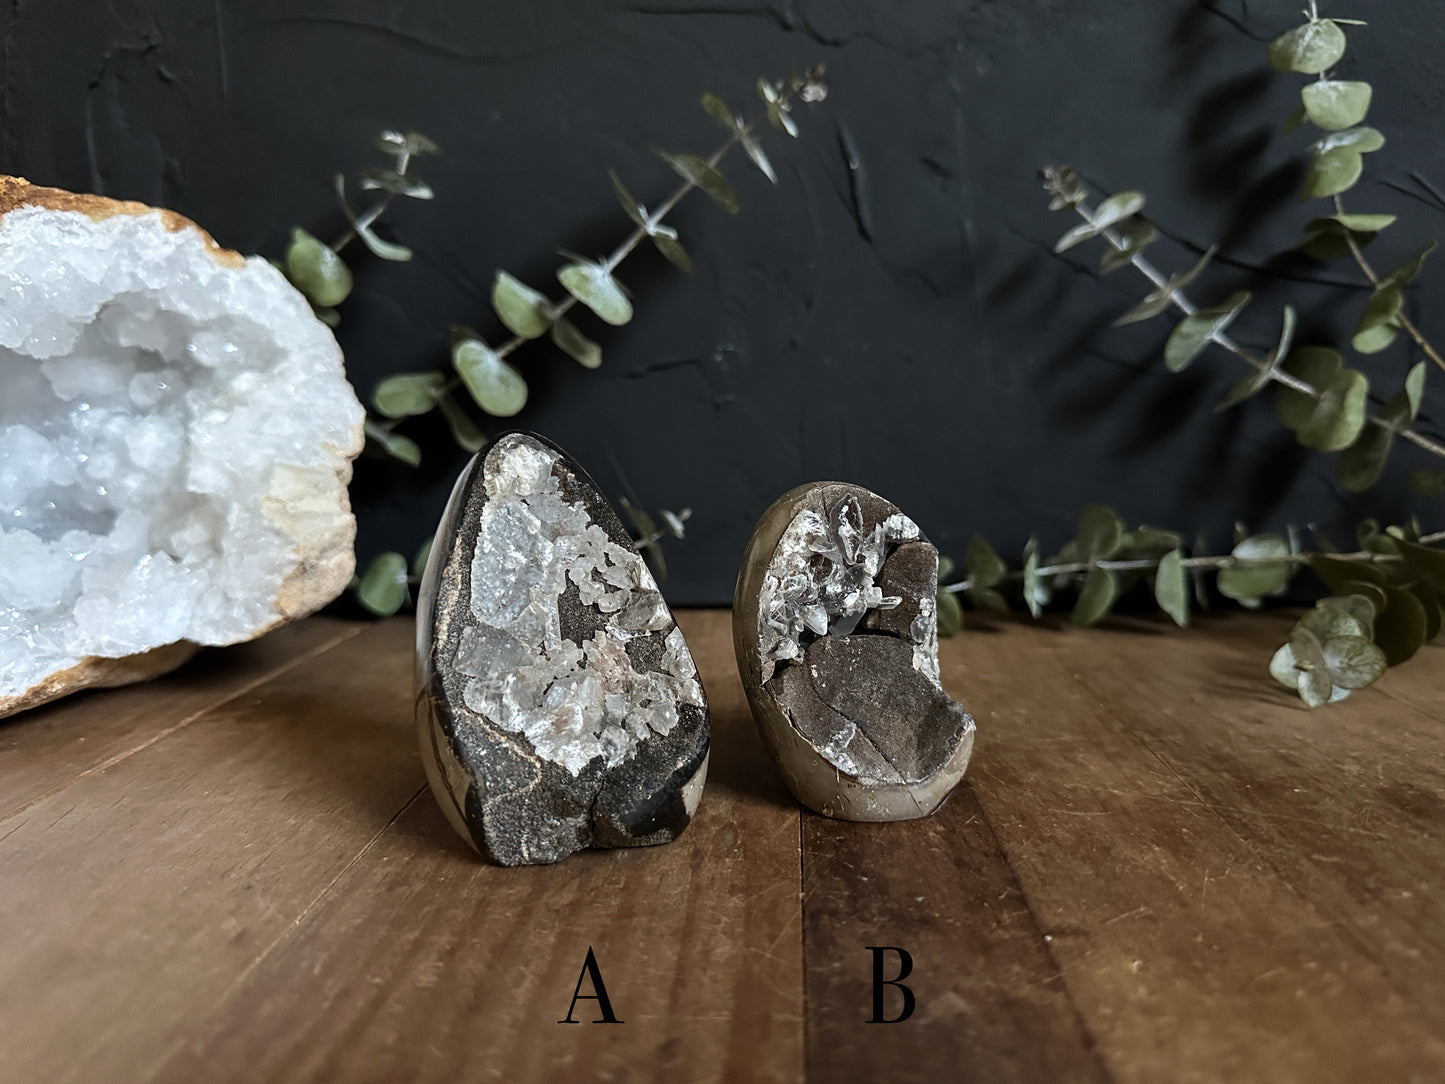 Septarian Geodes with Calcite Inclusions - Your Choice